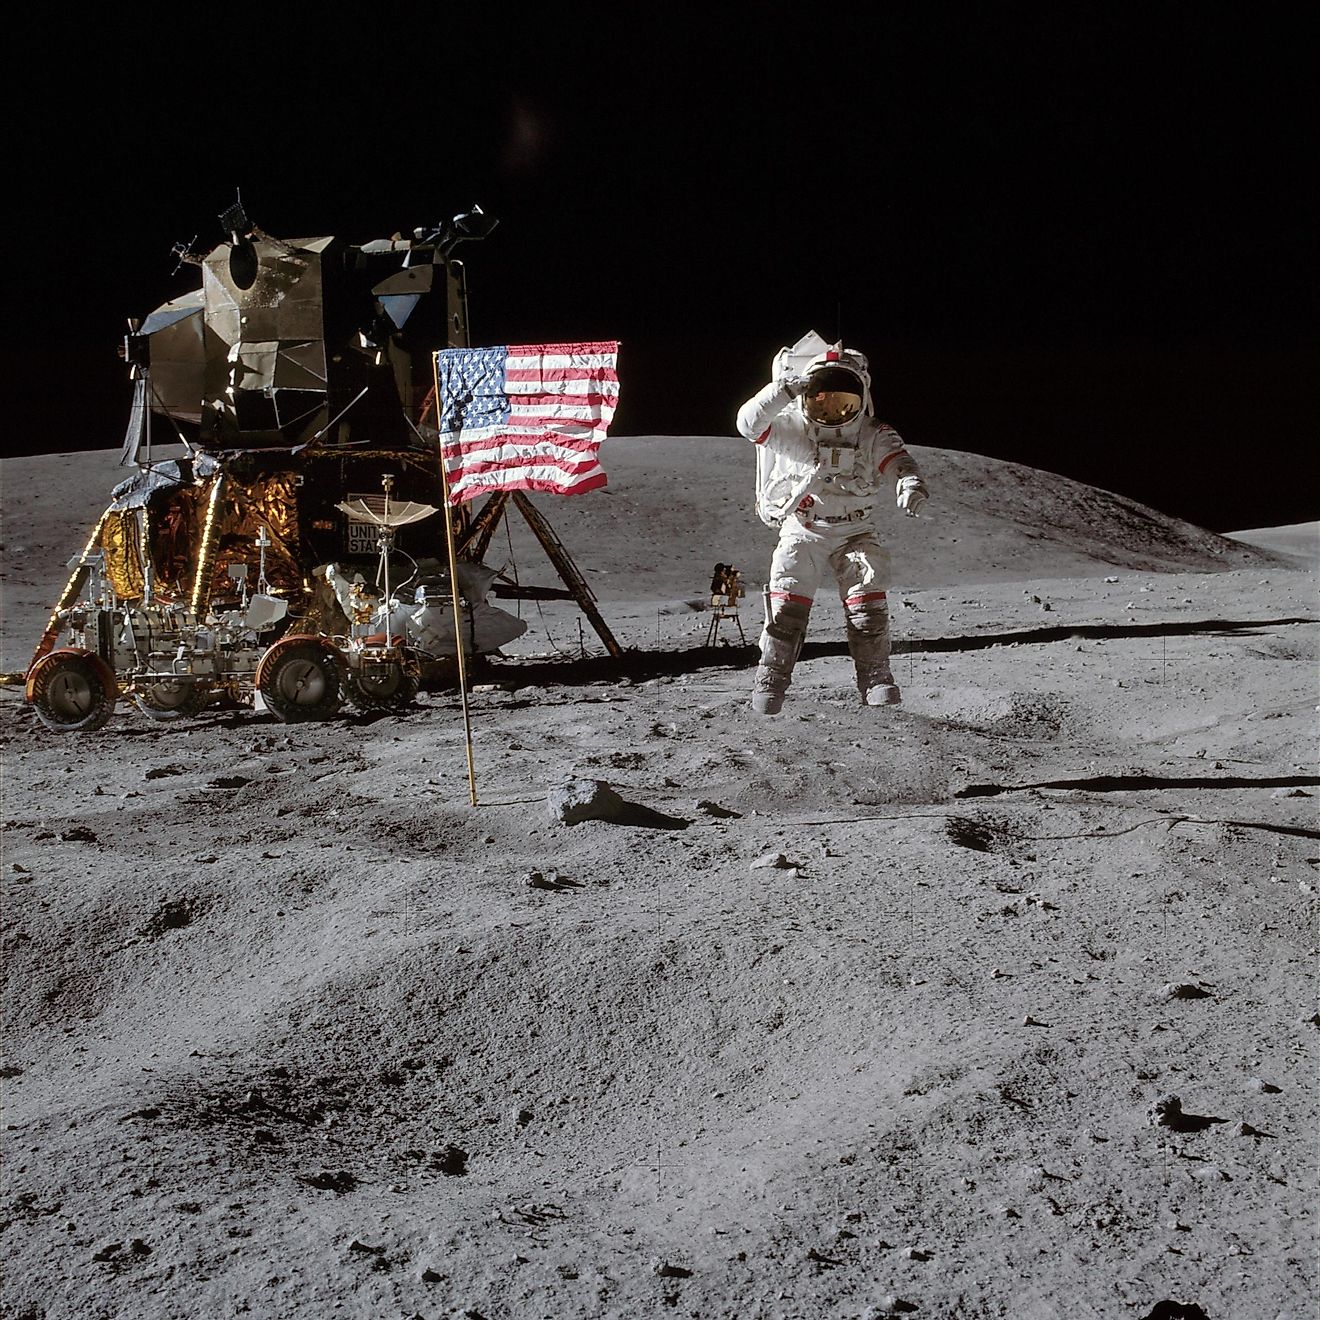 NASA hopes to put a human on the moon again in 2024. Photo by History in HD on Unsplash